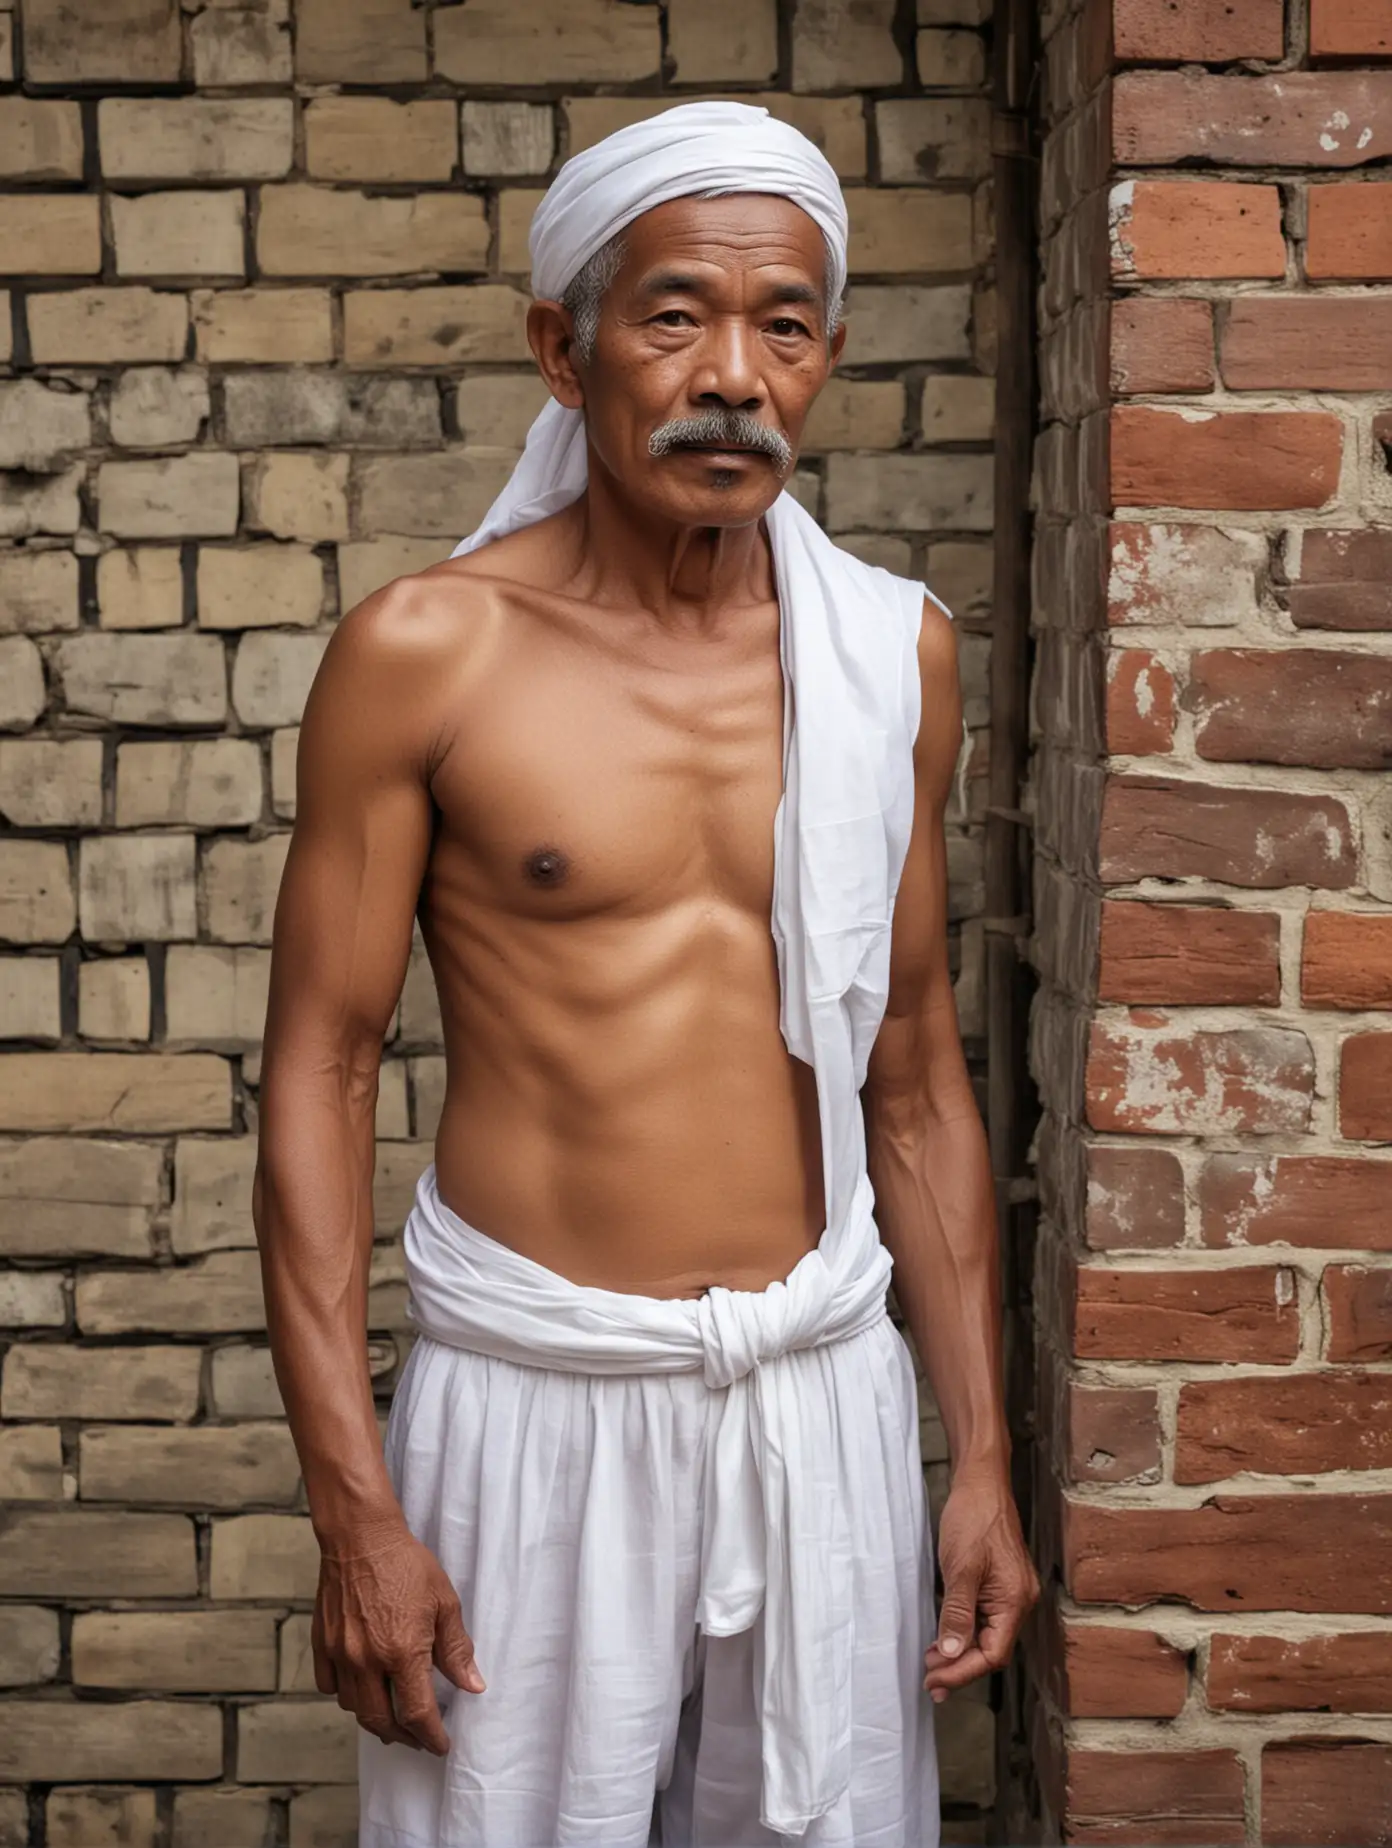 75 year old bare-chested Indonesian man, dark skinned, mustache, shirtless, wearing a long plain white Indonesian cloth, shirtless, wearing a plain white traditional Indonesian headband, pose facing the front, in a traditional brick house